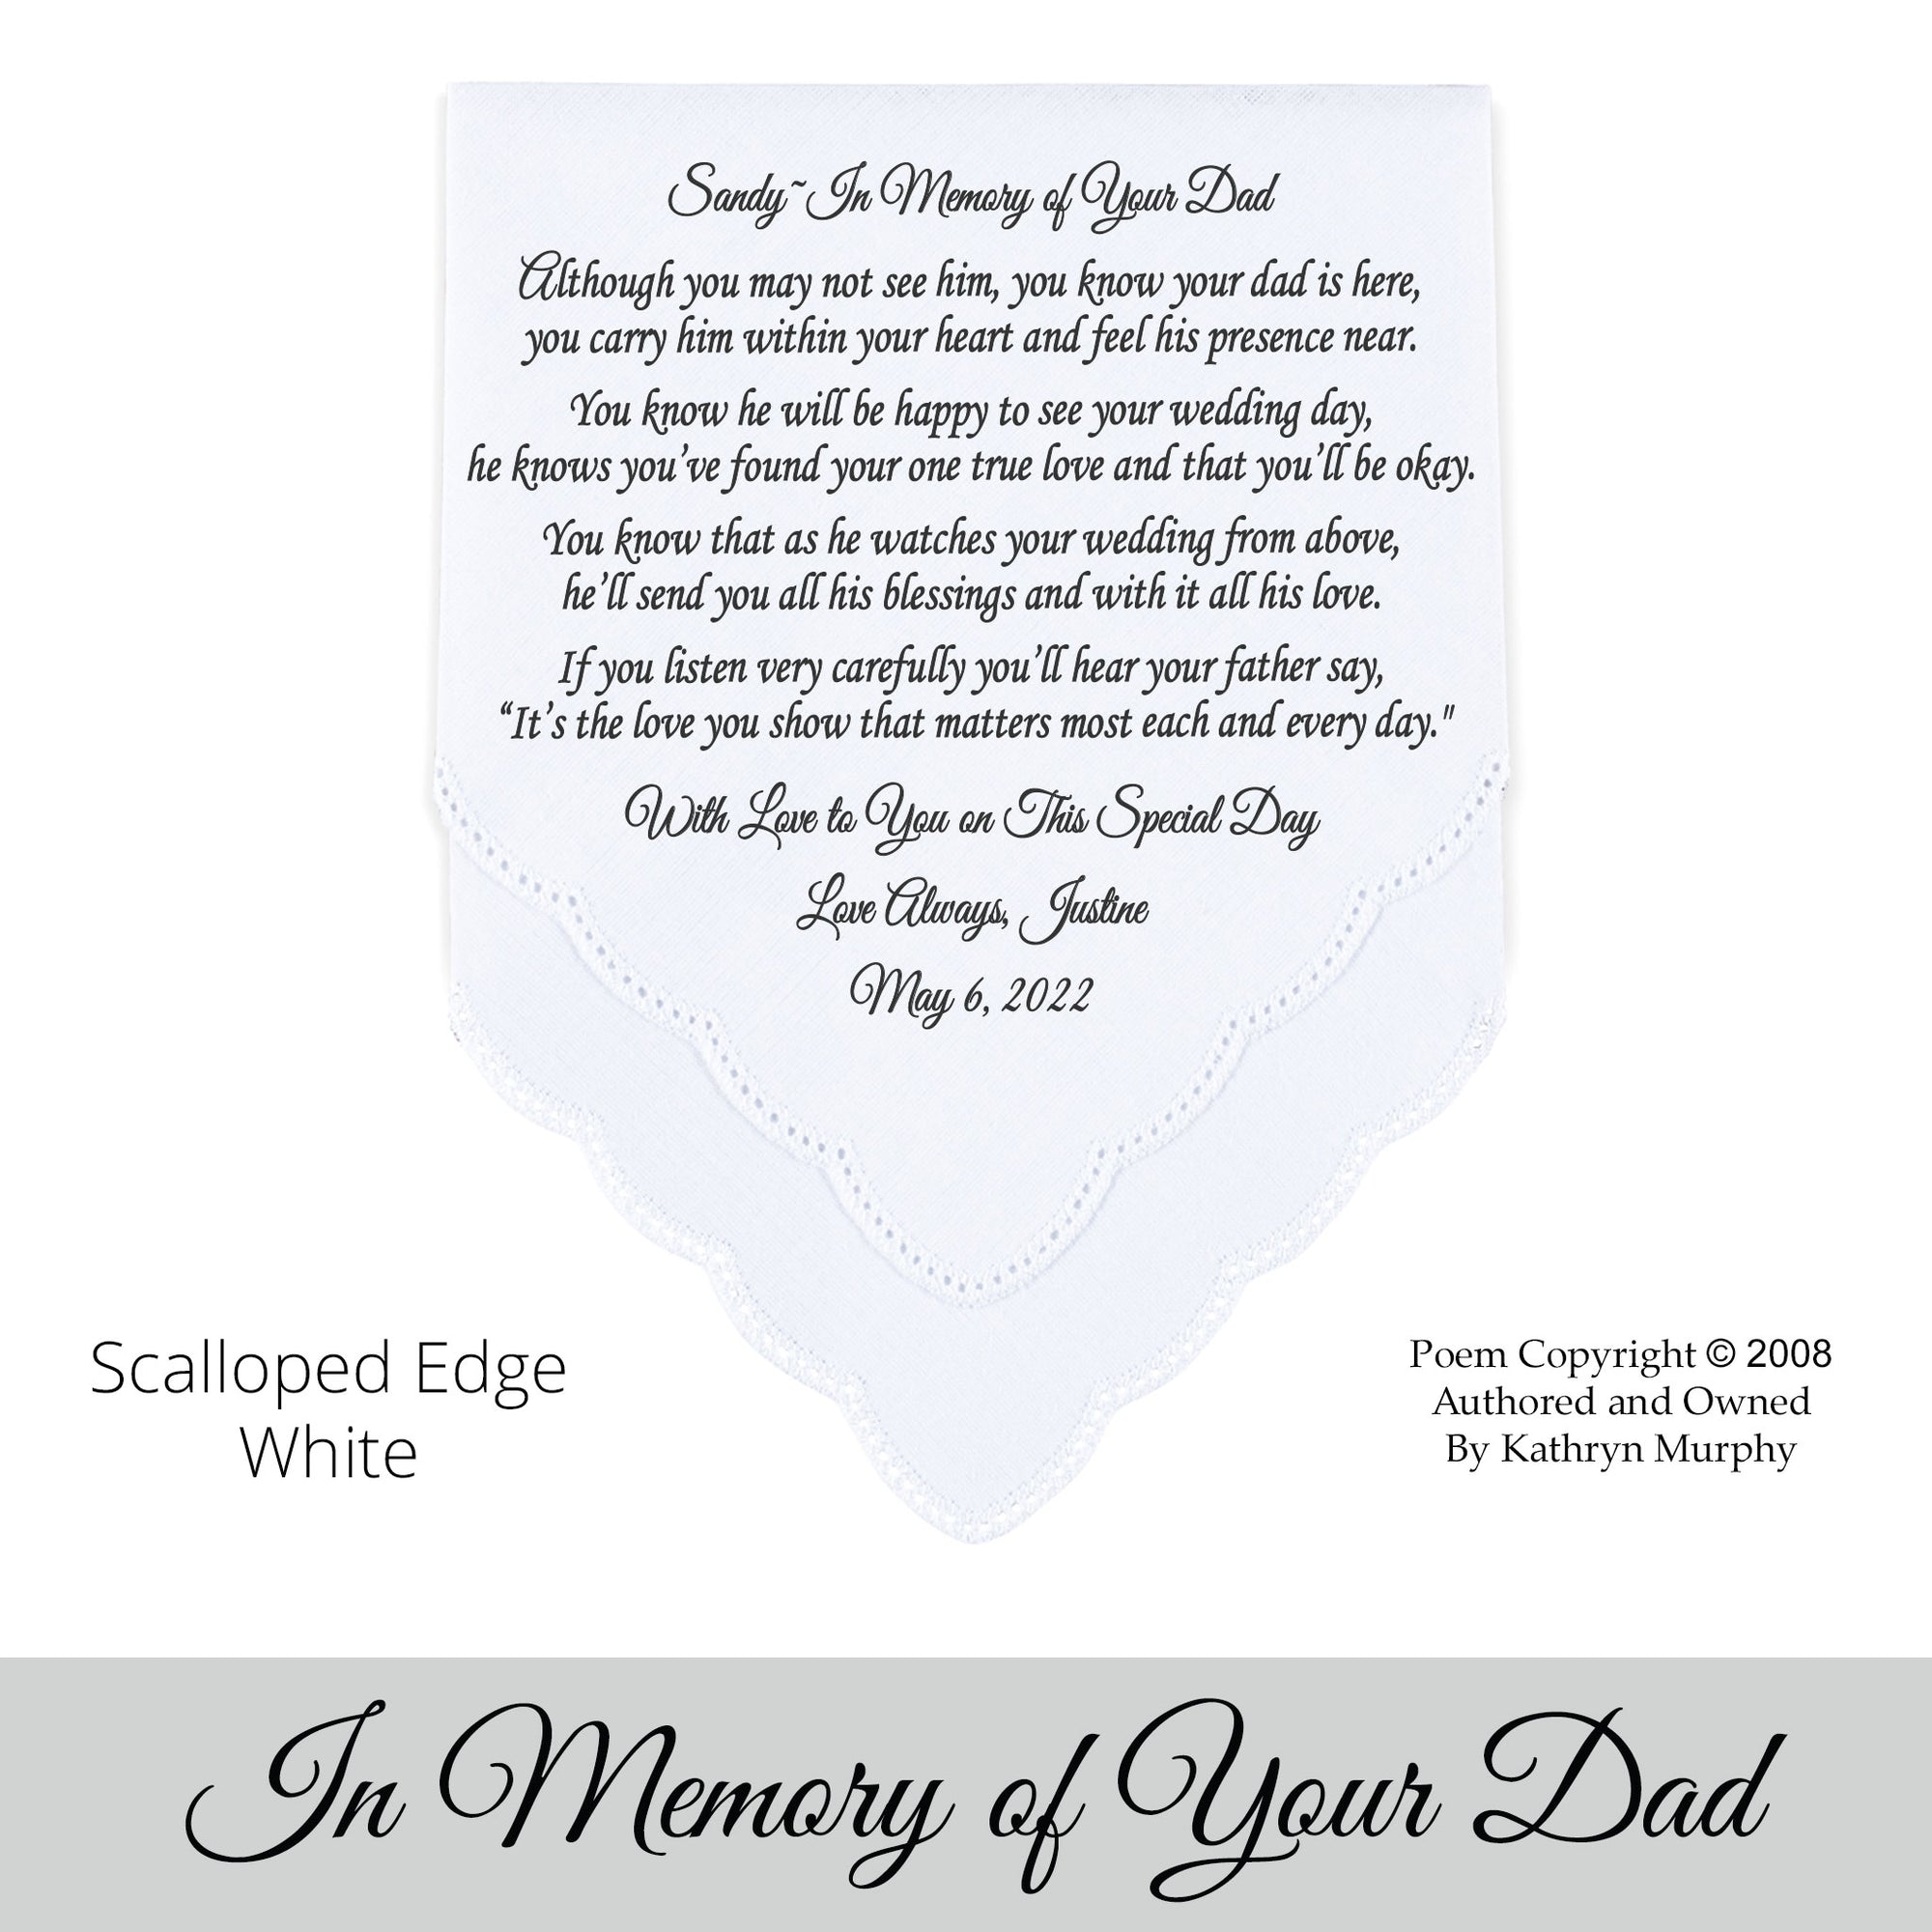 Gift for the Bride wedding hankie with the poem In Memory of your dad